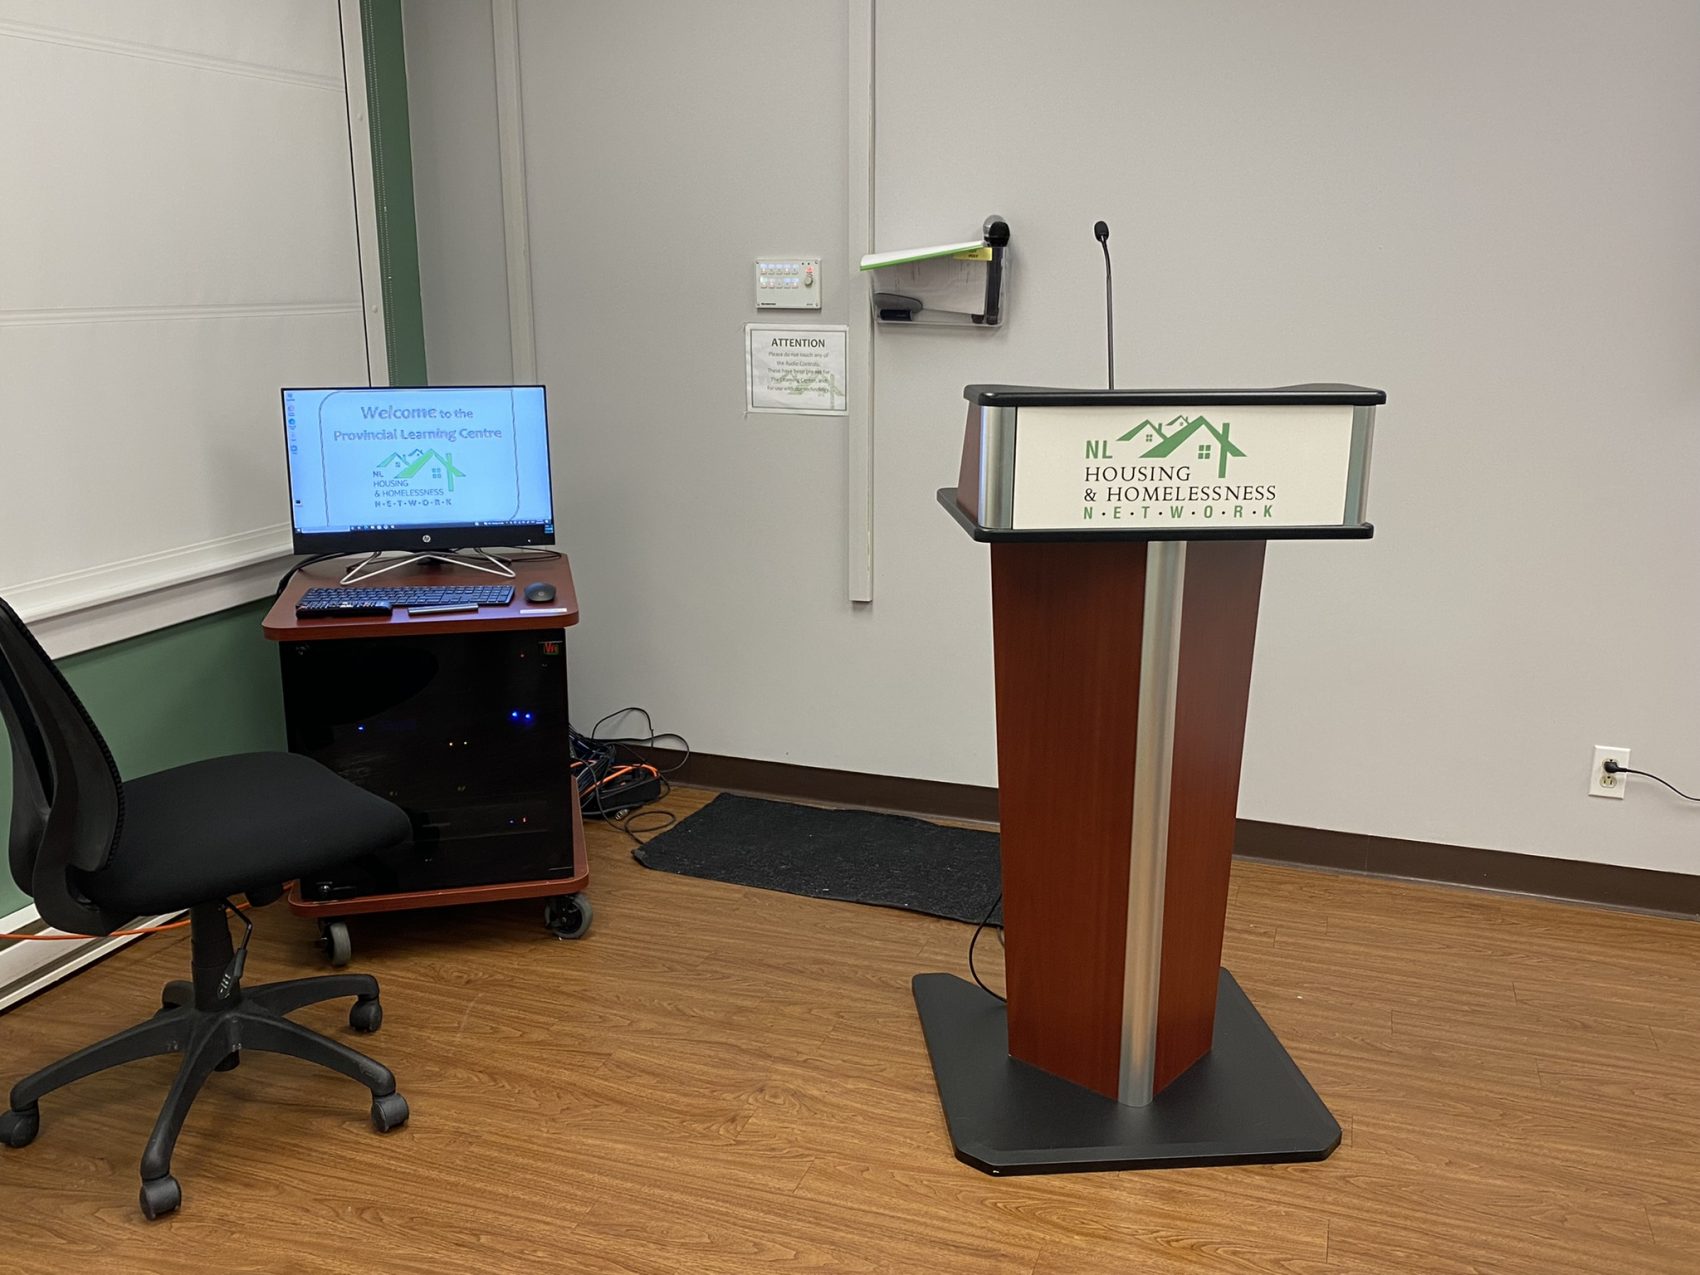 A podium with microphone next to a computer station.